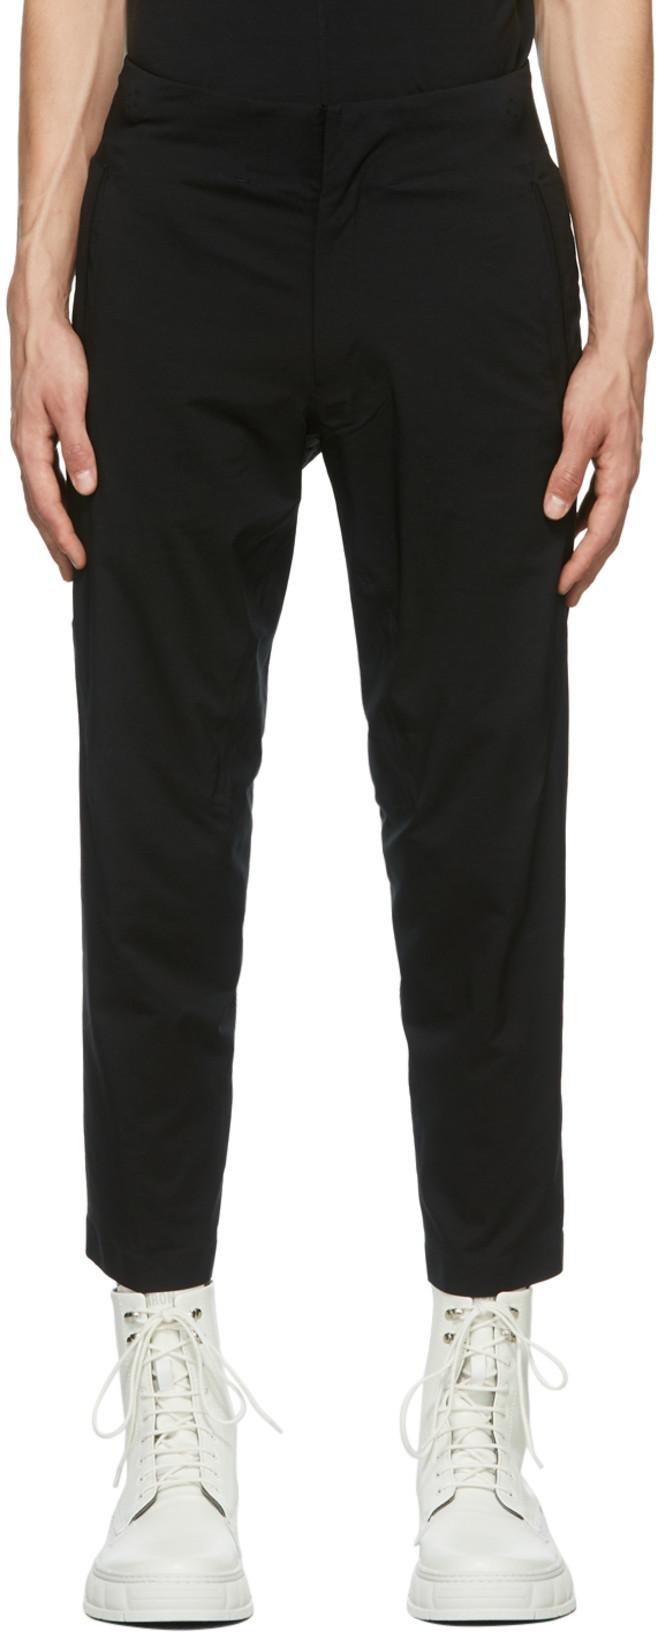 Black Relaxed Fit Tapered Pants by DESCENTE A LL TE RR AI N